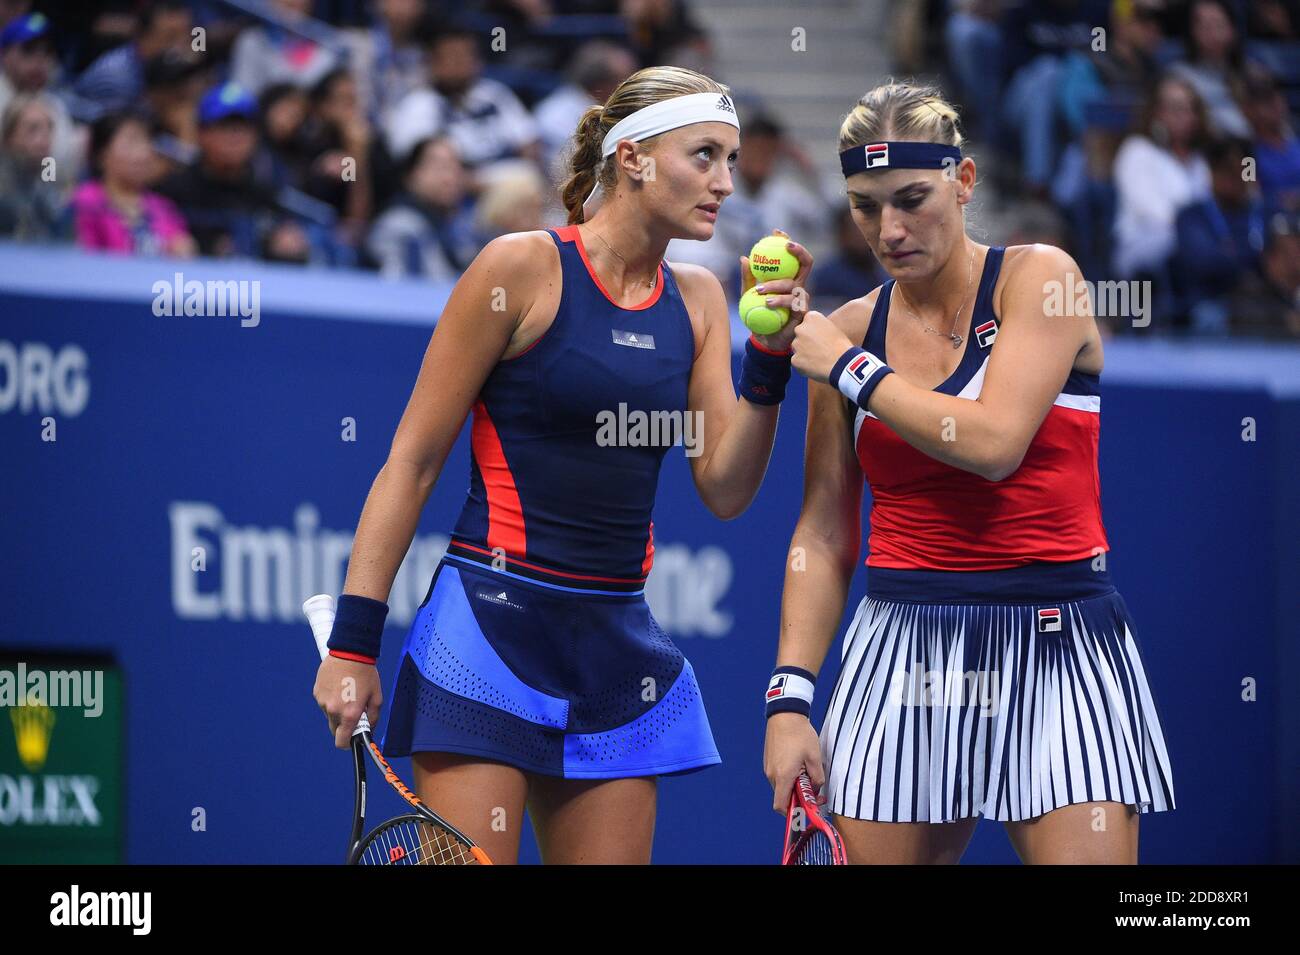 Kristina Mladenovic (FRA) and Timea Babos (HUN) play the women's double  final at the Billie Jean National Tennis Center in New York City, NY, USA  on September 9, 2018. Photo by Corinne